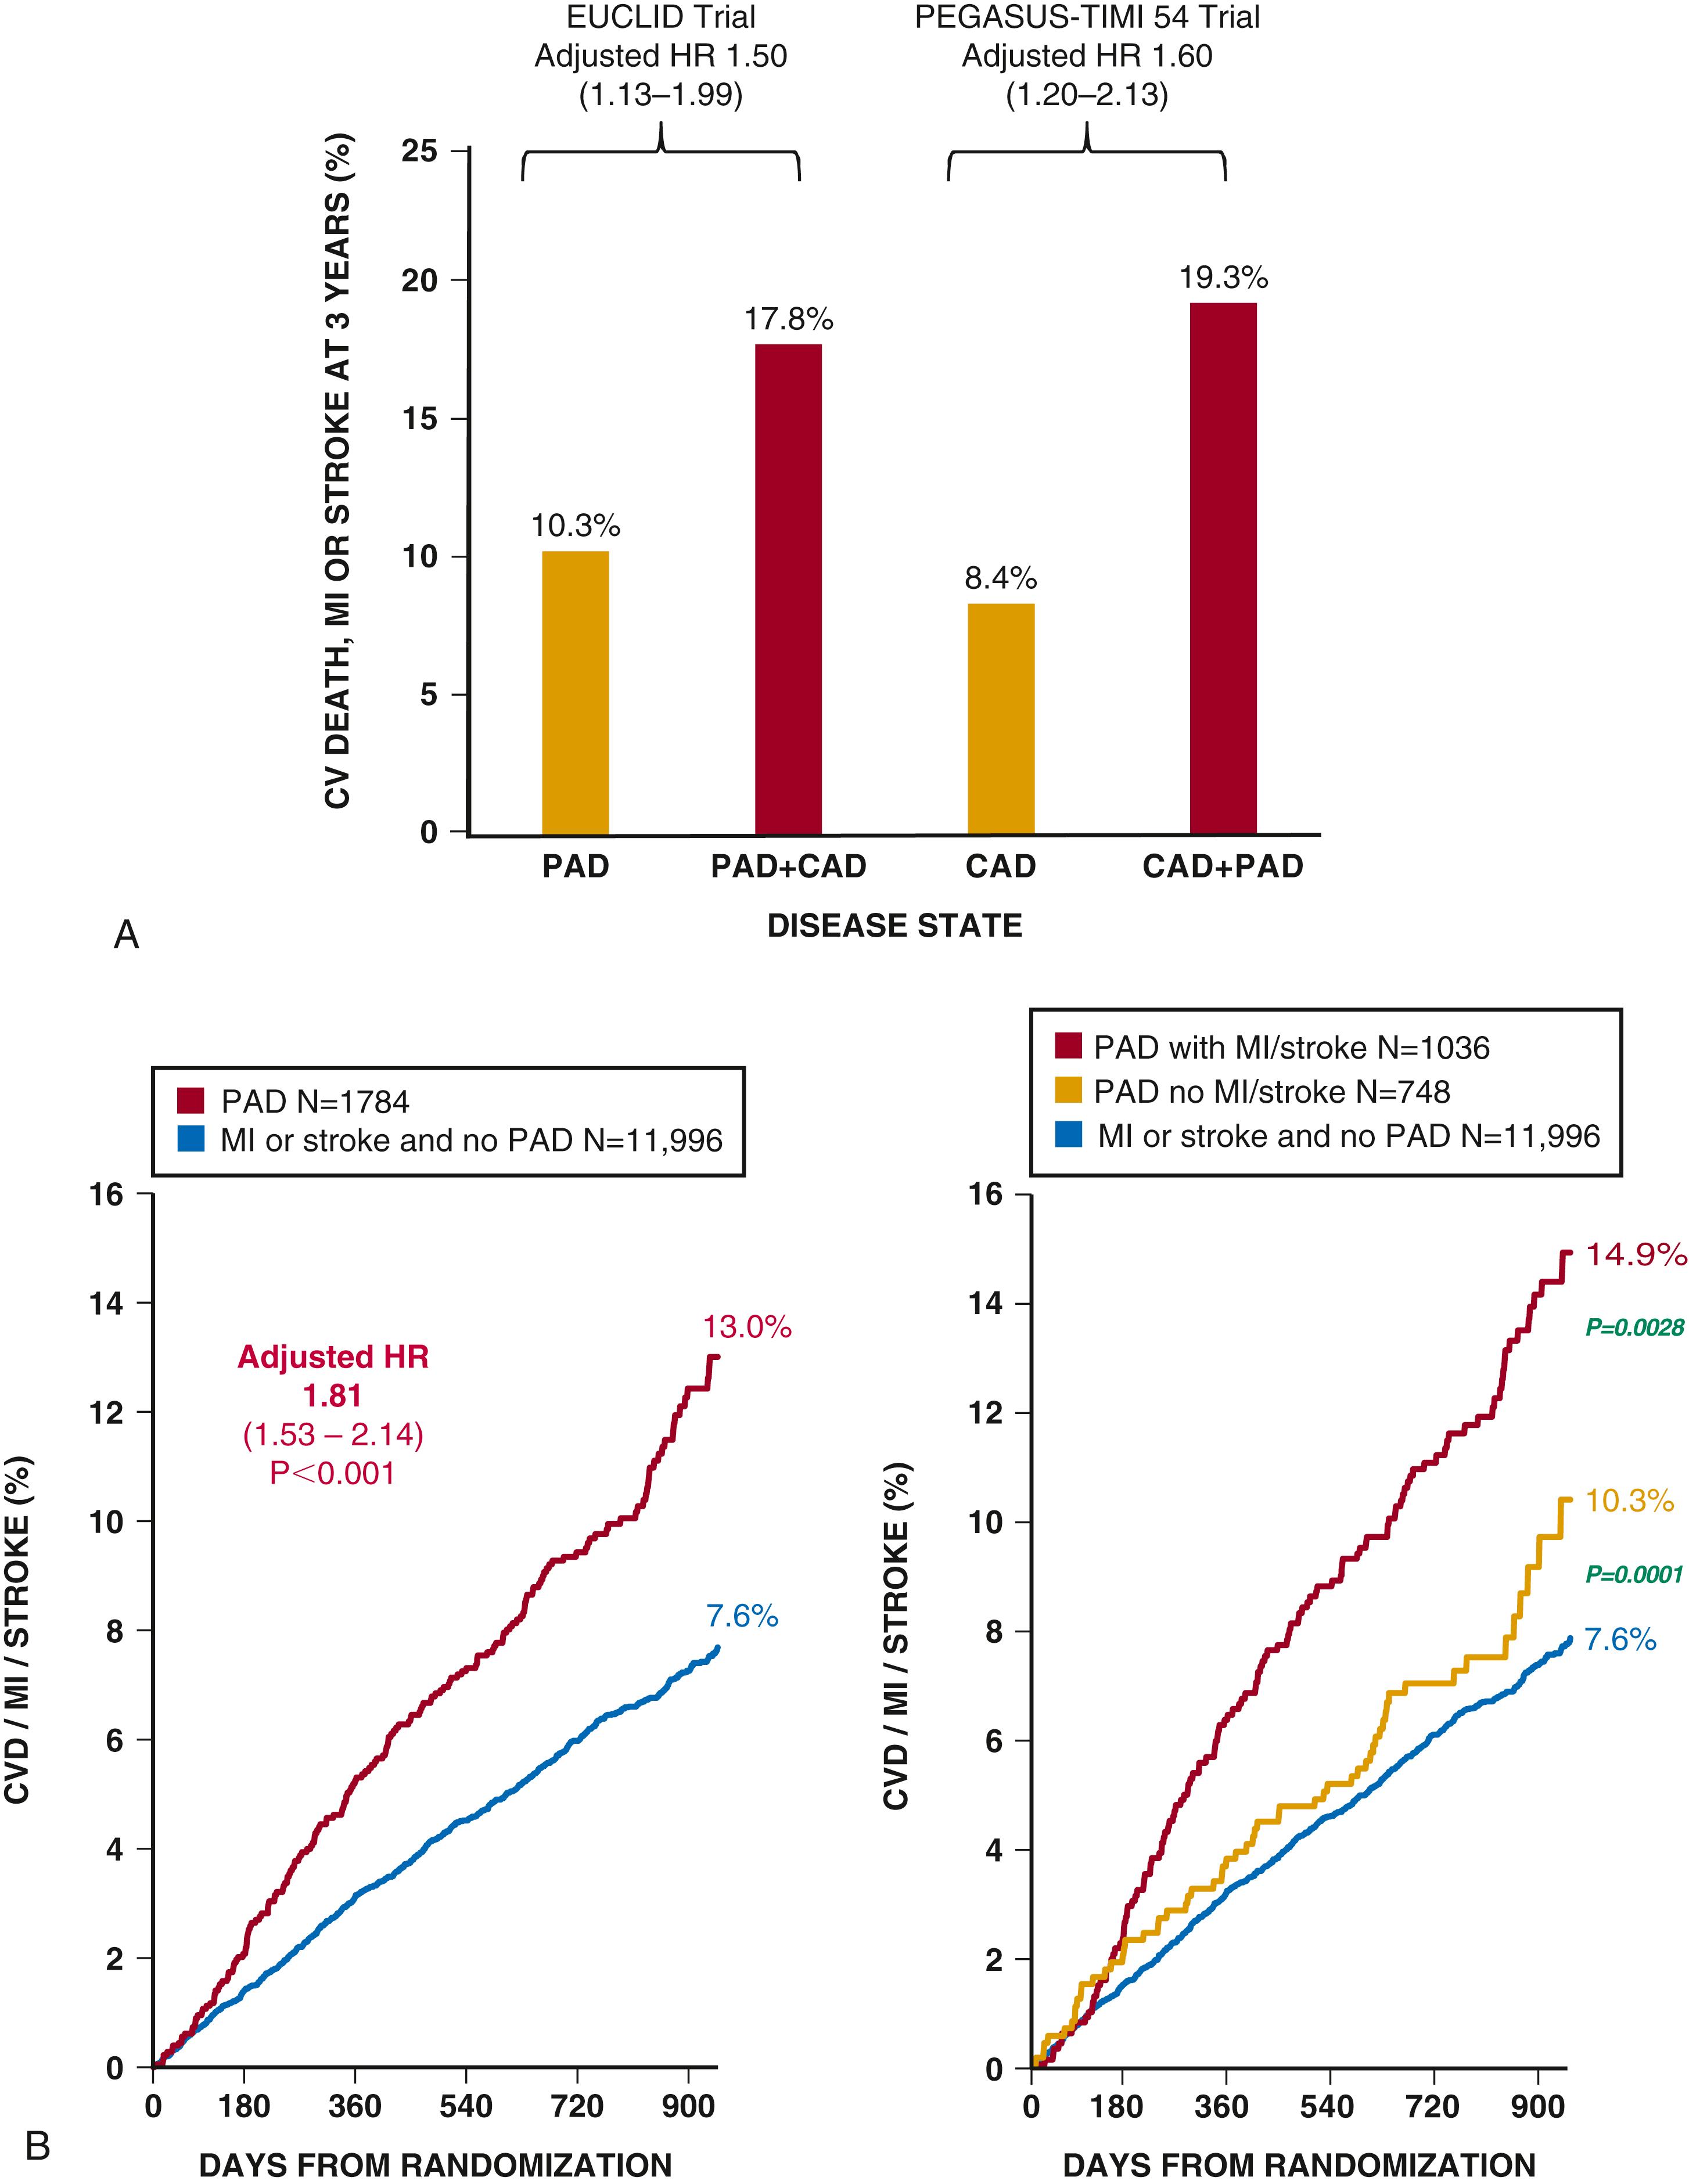 EFIGURE 43.5, A, Risk of major adverse cardiovascular events in patients with both peripheral artery disease (PAD) and coronary artery disease (CAD) (red bars) versus a single symptomatic territory (yellow bars). B, Risk of major adverse cardiovascular events in patients with peripheral artery disease (PAD) relative to those with prior myocardial infarction (MI) or stroke ( left graph ), with the PAD group stratified by polyvascular disease (red line) versus PAD only (yellow line).